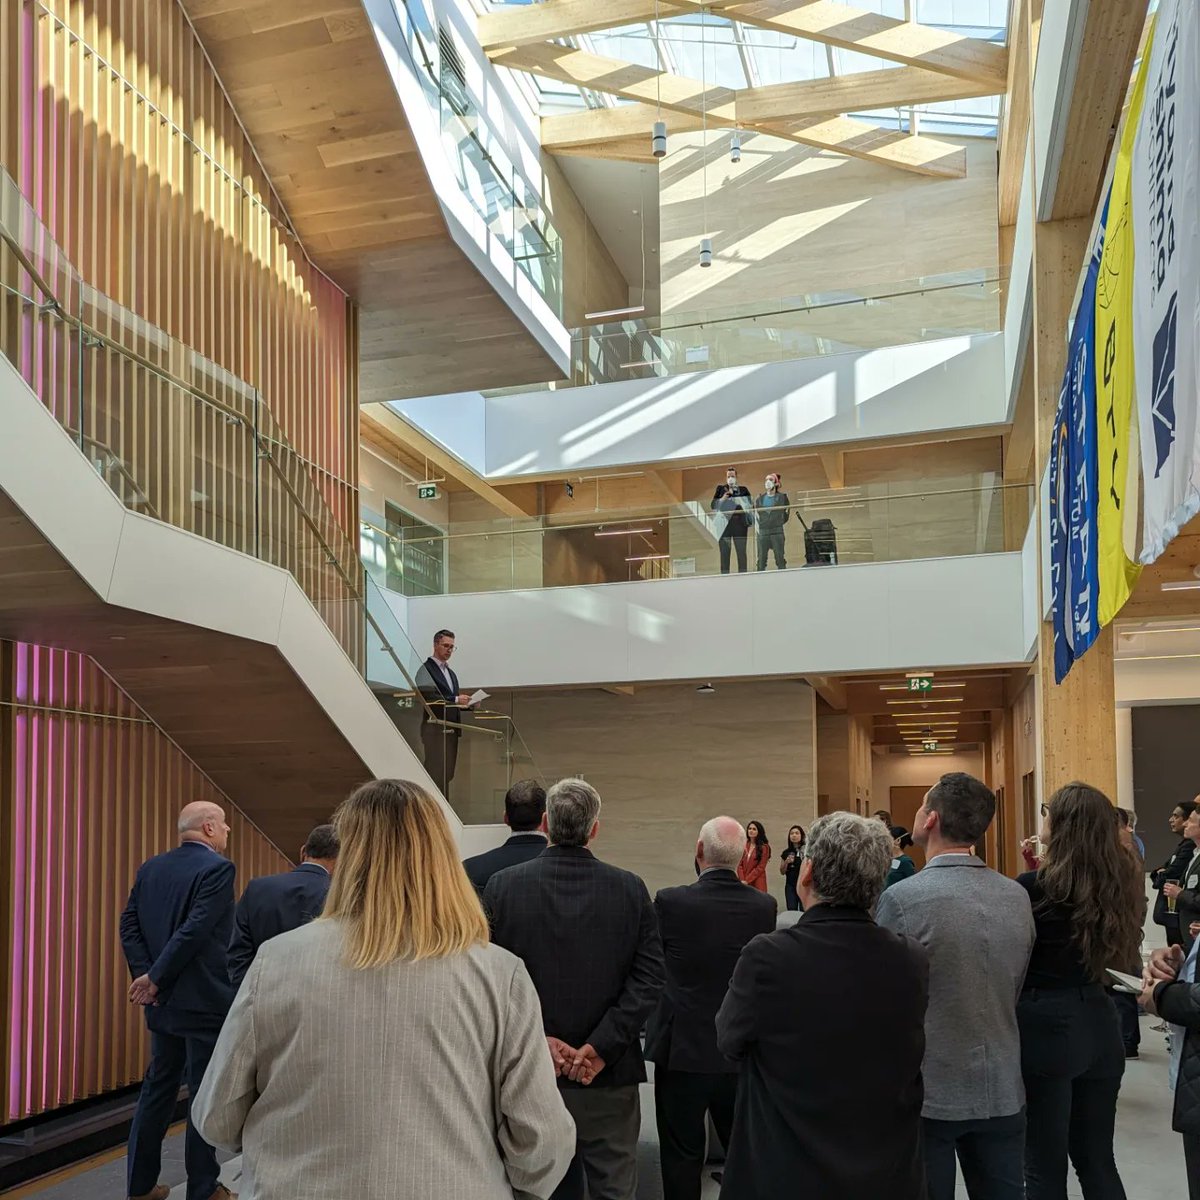 An absolute privilege to get an early preview of the @osstf mass timber, LEED Platinum bldg by @moriyamateshima, @fast_epp, @Introba_Inc & @EasternConst. Carbon footprint of 308 kgCO2e/m2 and TEUI of 67kWh/M2/yr. We have all the tools we need to build climate resilient new bldgs.